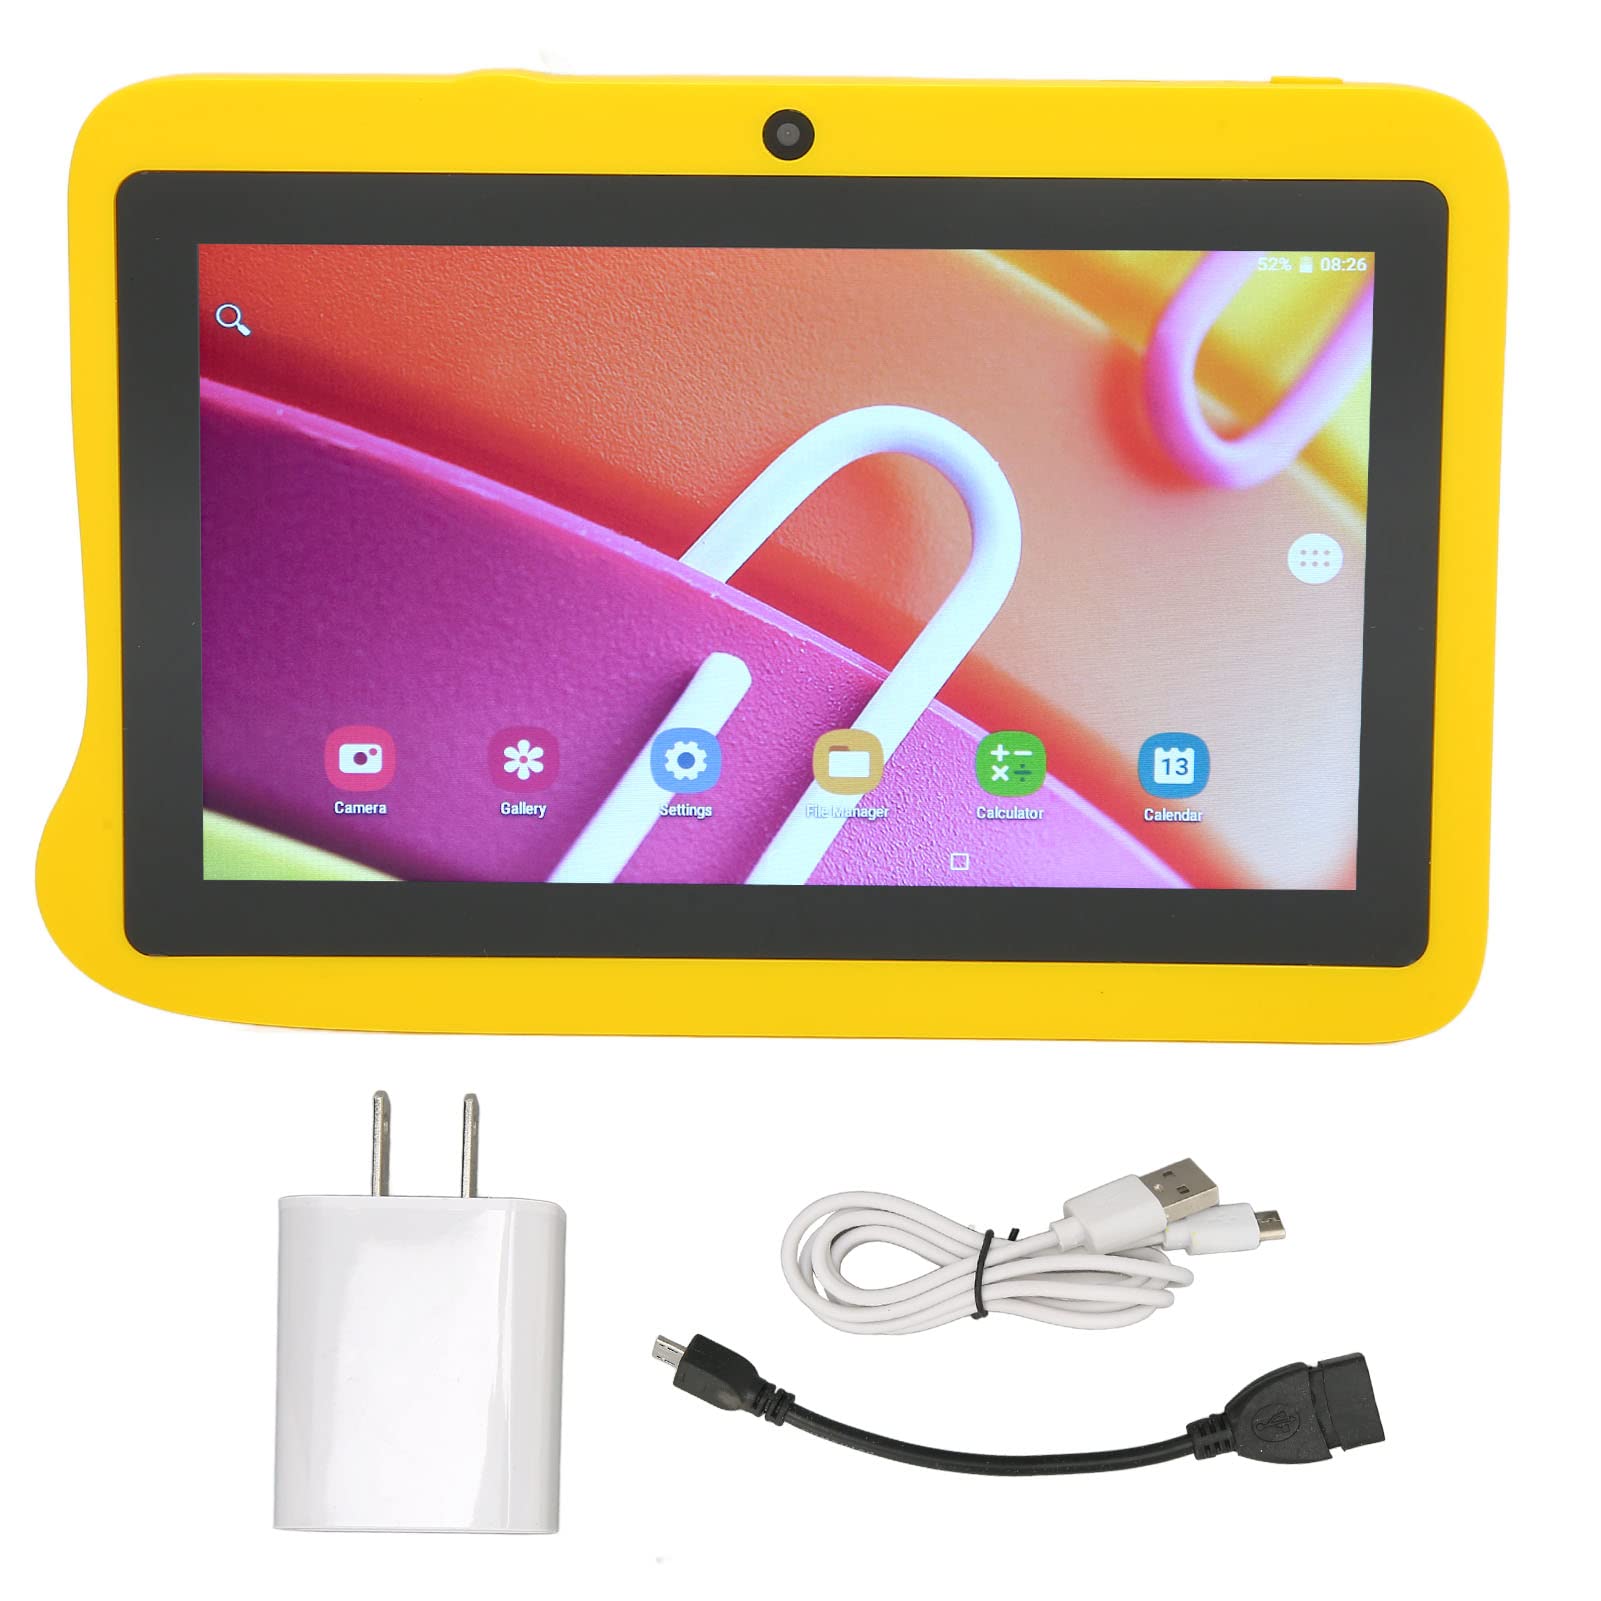 WEYI HD Tablet, Kids Tablet US Plug 100-240V 5000mAh Capacity 5MP Front 8MP Rear 8 Core with Reading Support for 10.0 (Yellow)